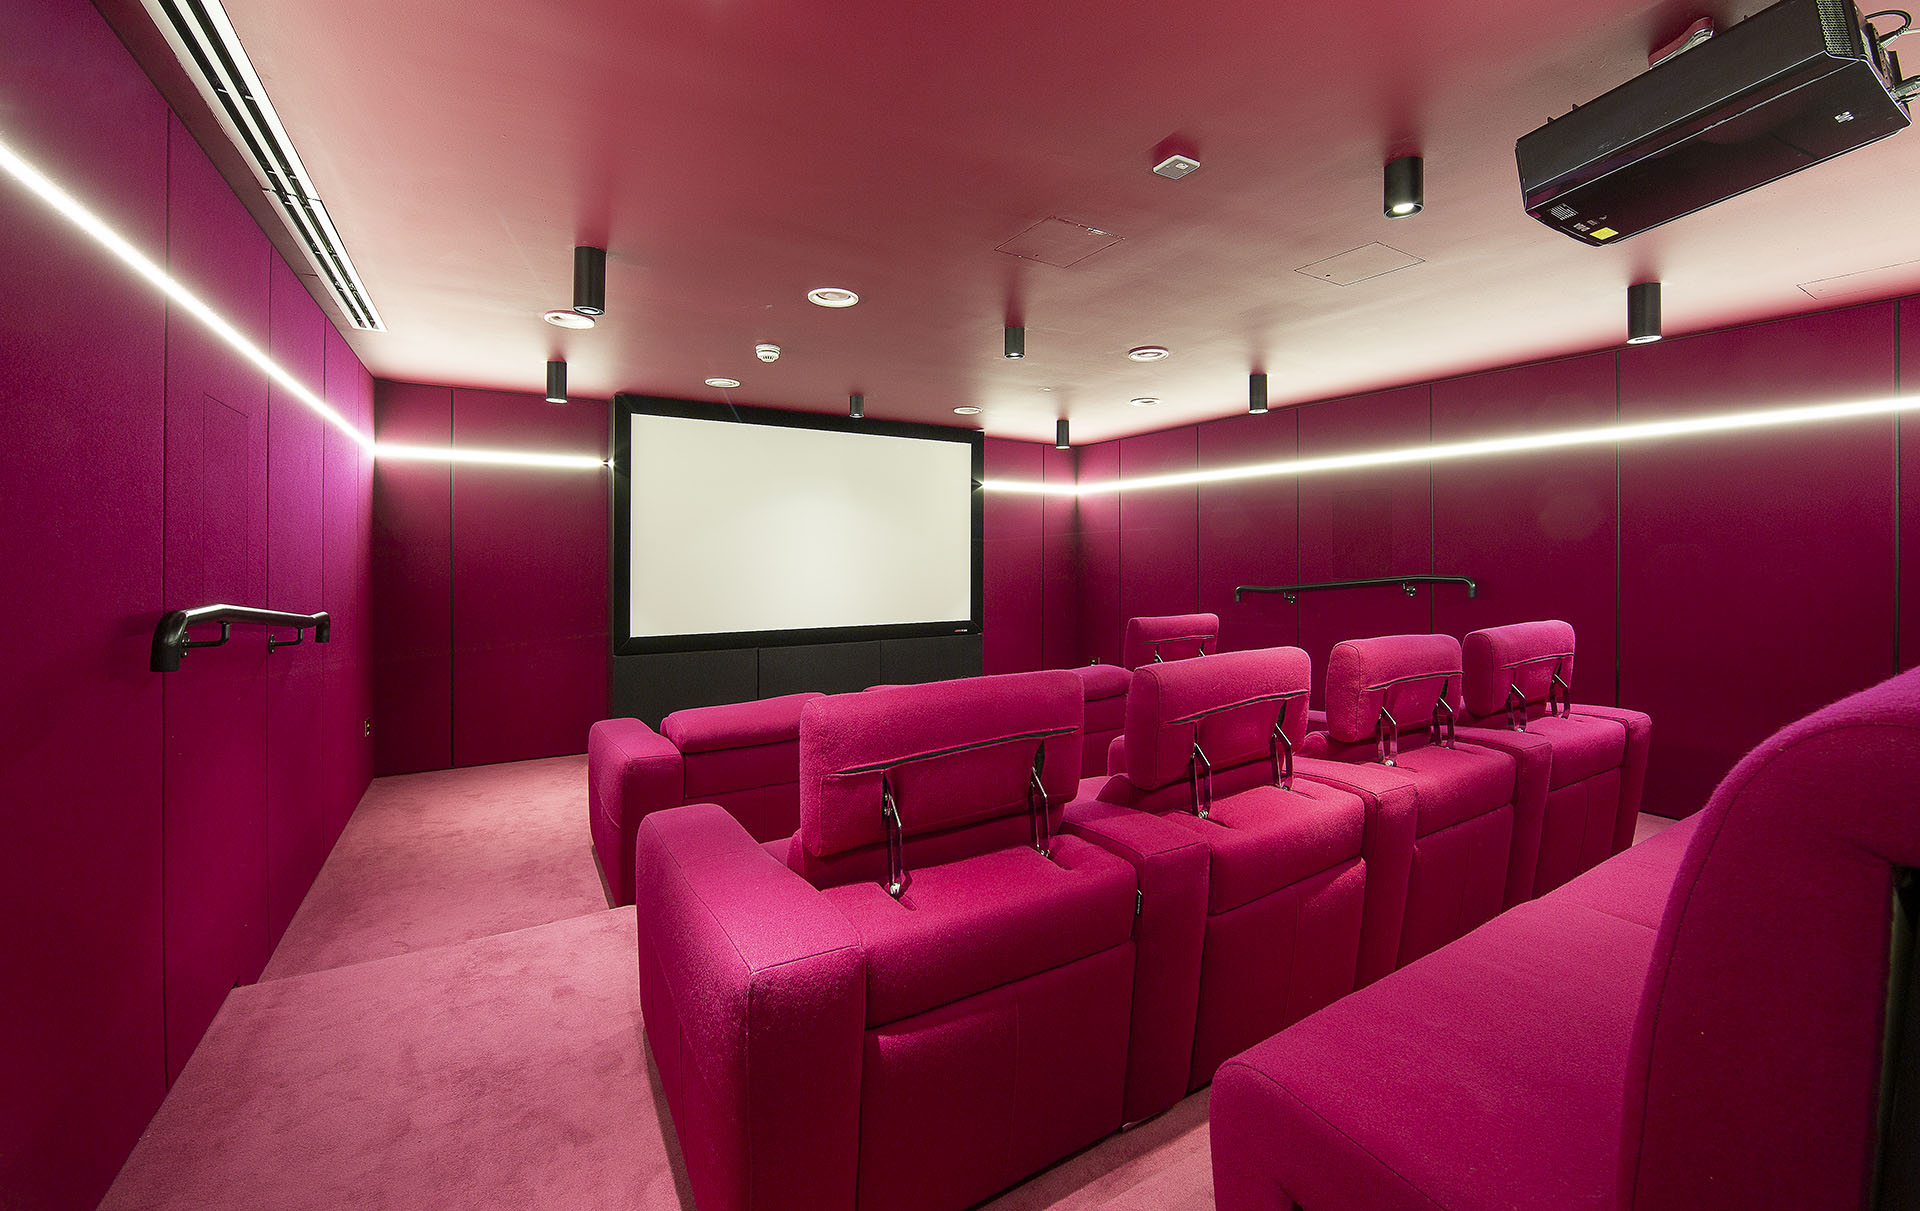 Bookable cinema within the Waterman - view towards Screen from entrance/exit